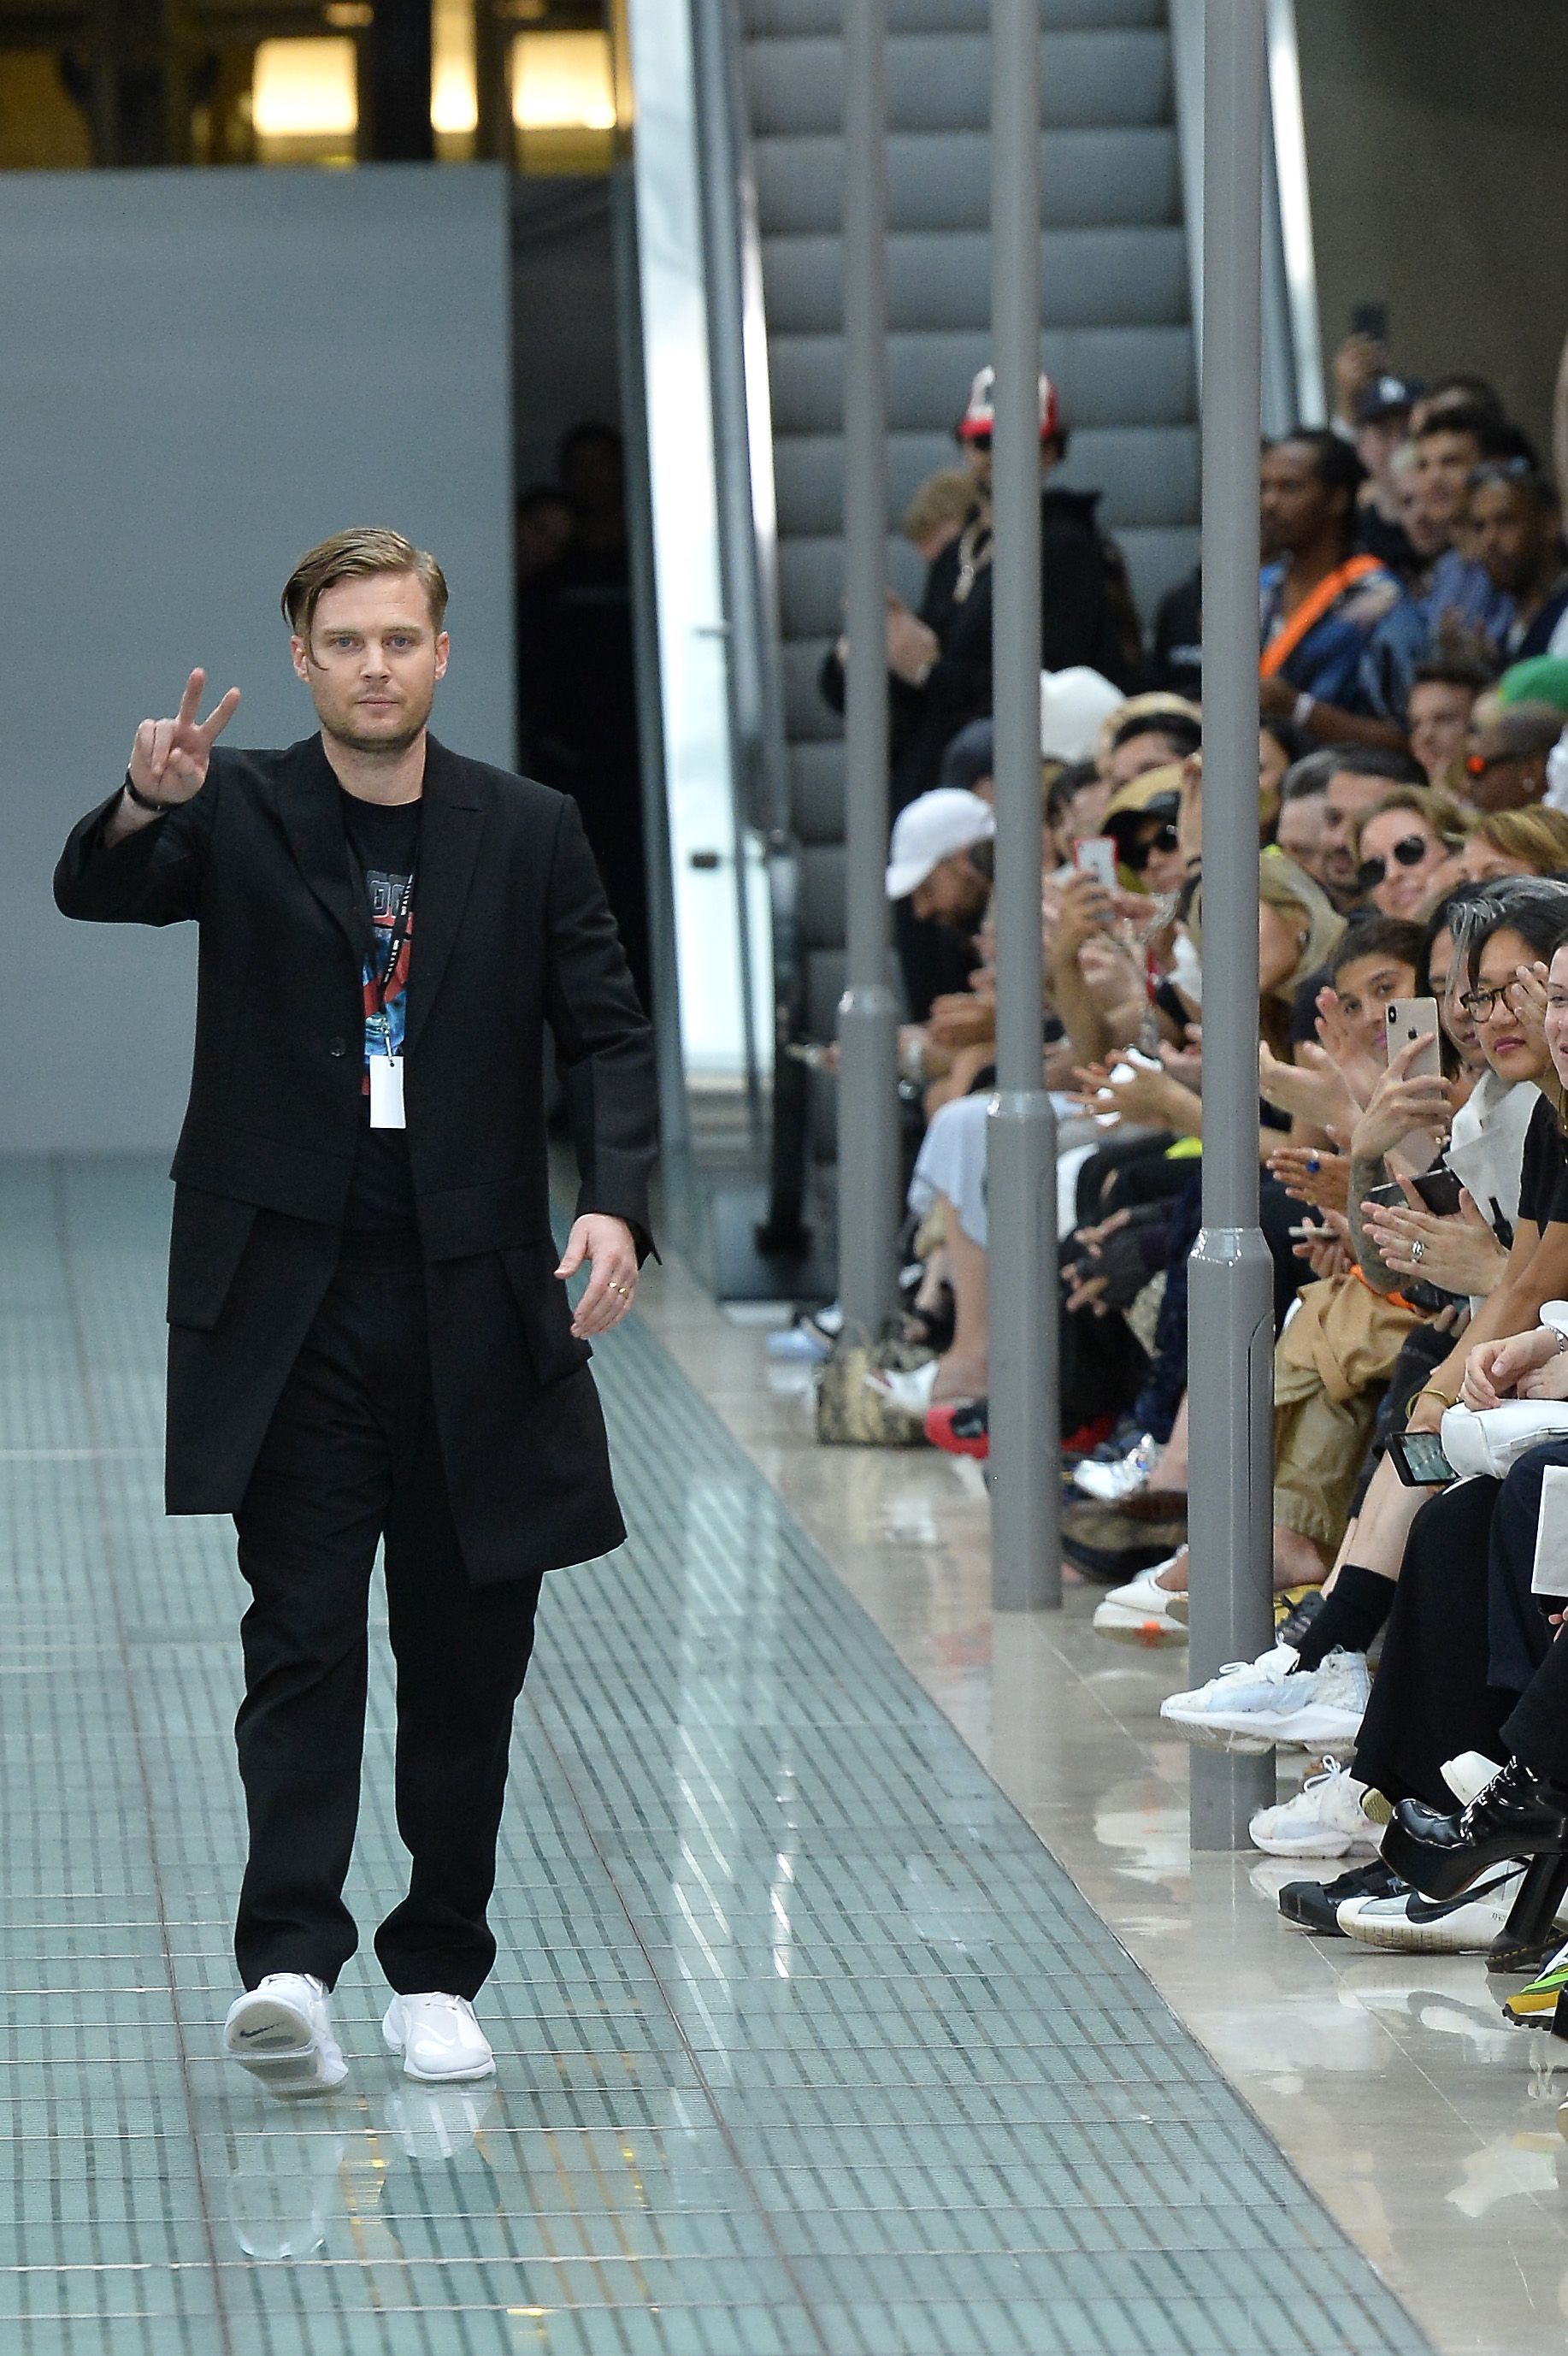 GIVENCHY appoints Matthew M. WILLIAMS as Creative Director - LVMH